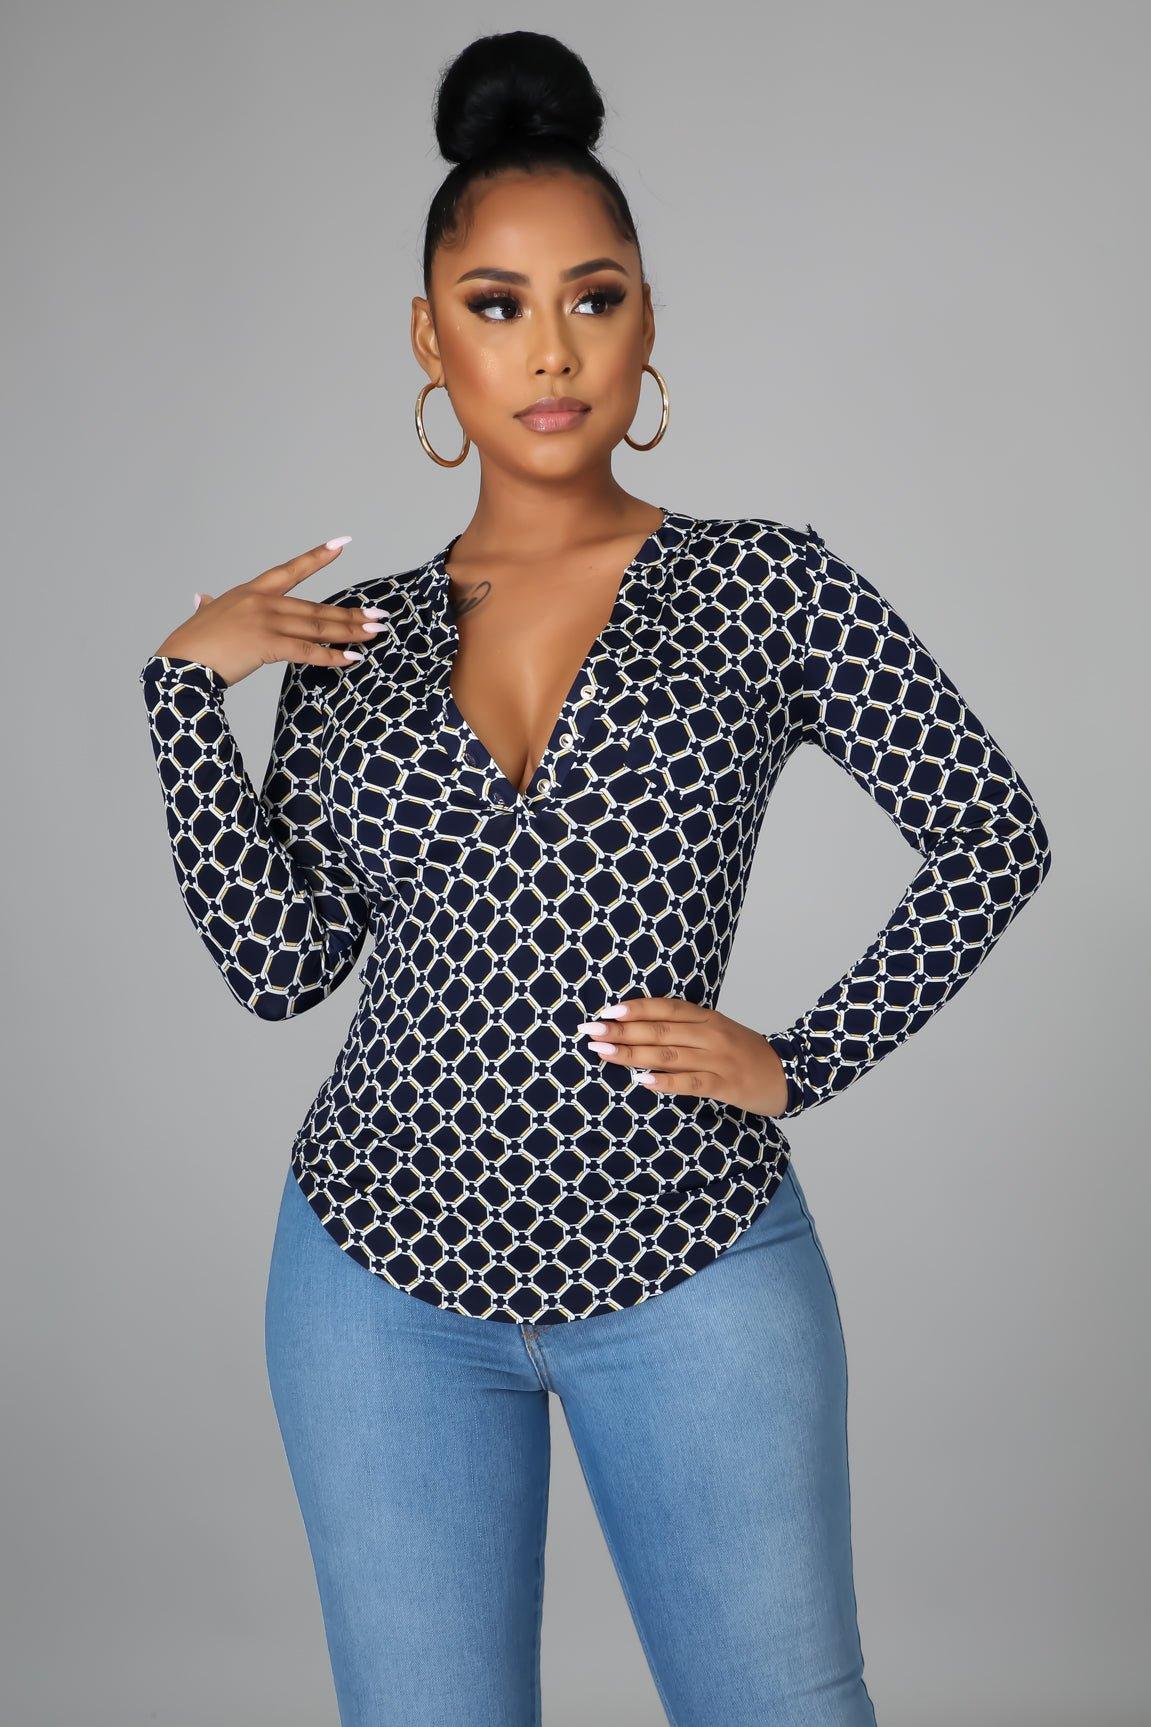 Haley Long Sleeves Blouse - MY SEXY STYLES